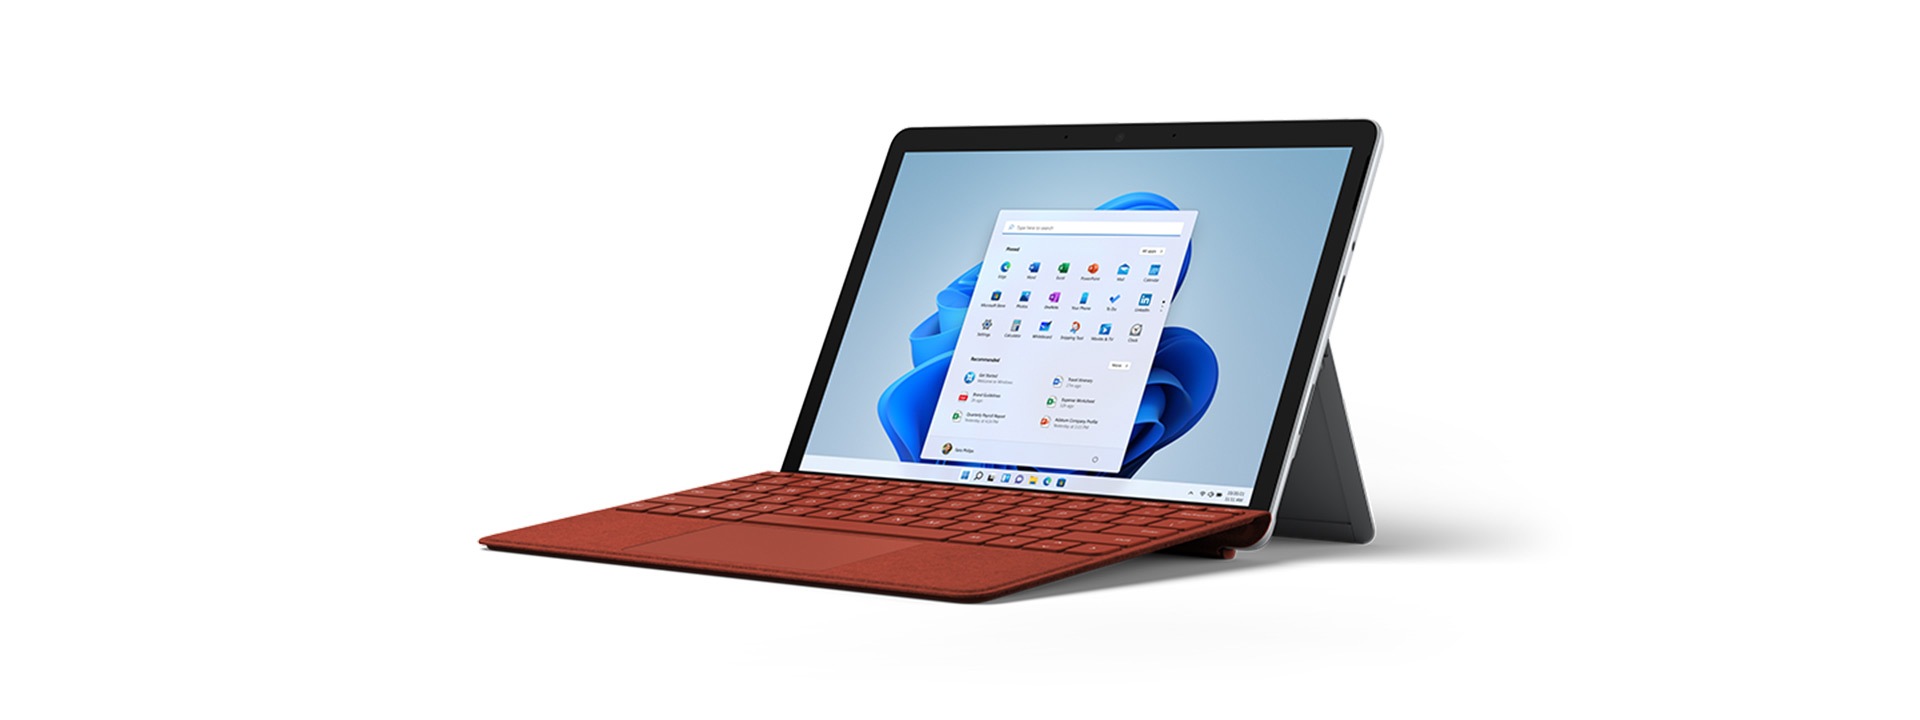 Surface Go 3 - Most portable 2-in-1 tablet & laptop - Microsoft Surface